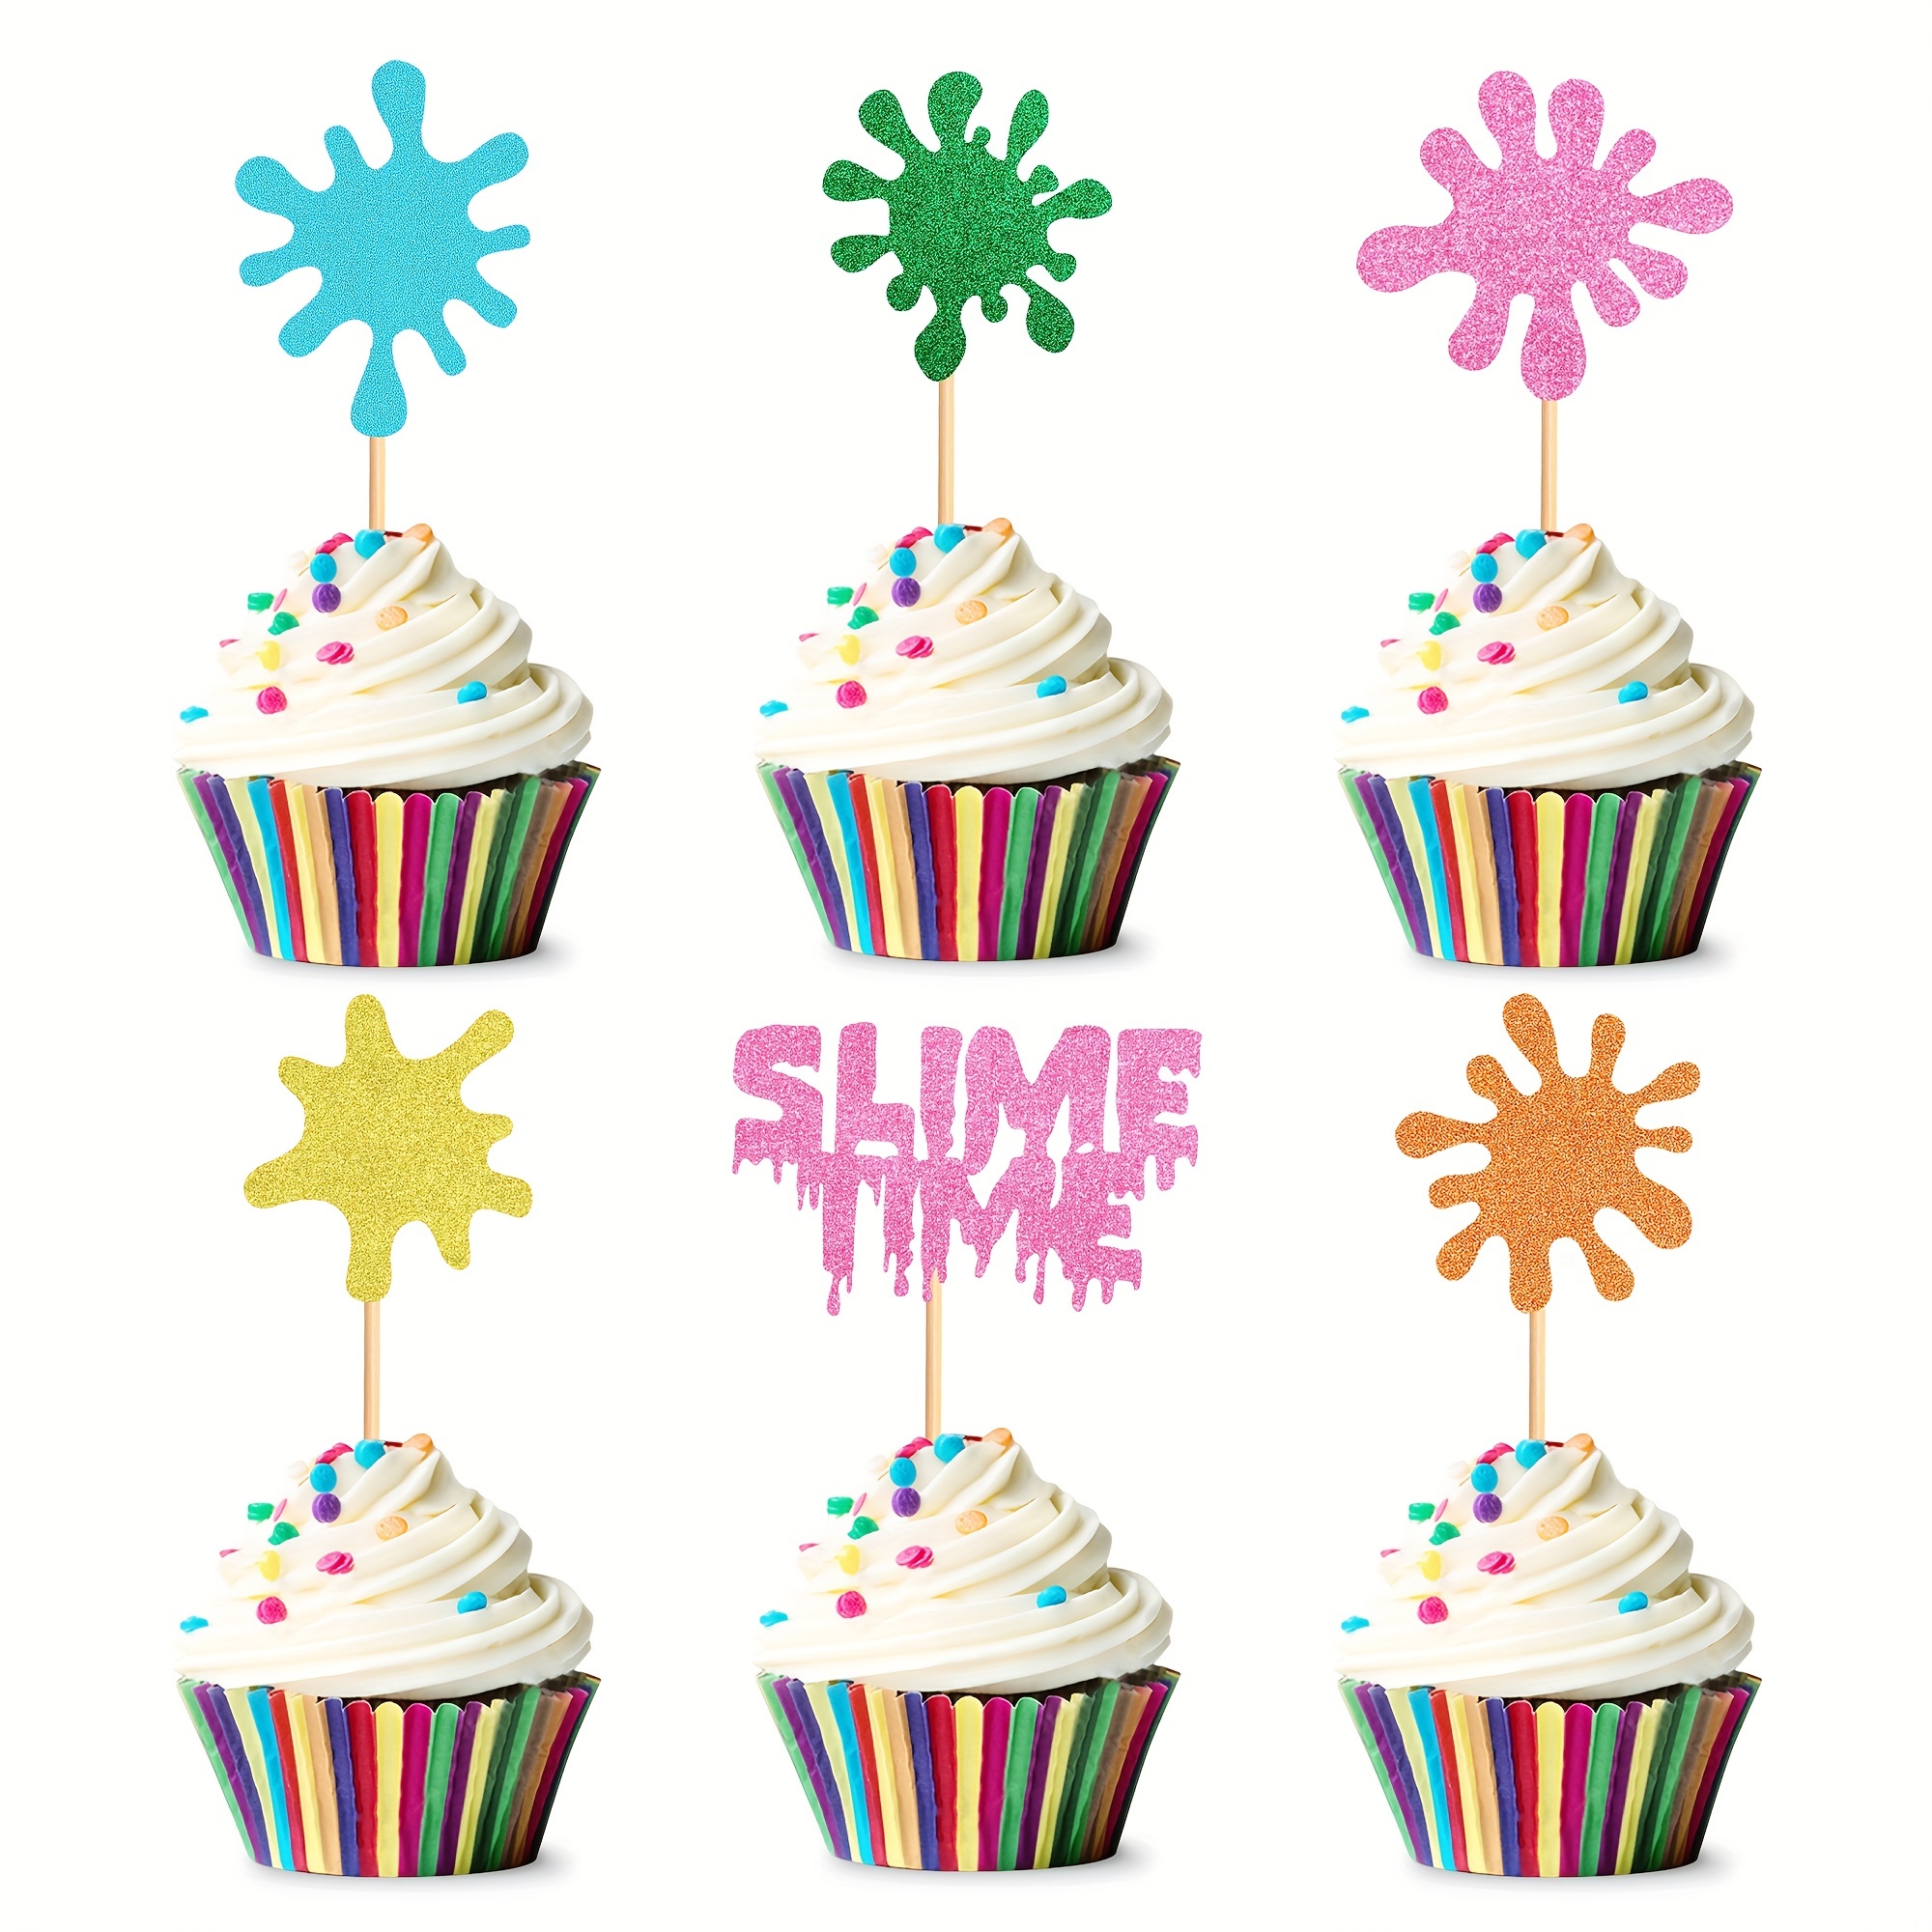 SaSbSc Art Party Cake Decorations with Paint Cupcake Topper Cute Paint  Party Supplies Art Themed Birthday Favors for Kid Slime Party Graffiti  Artist